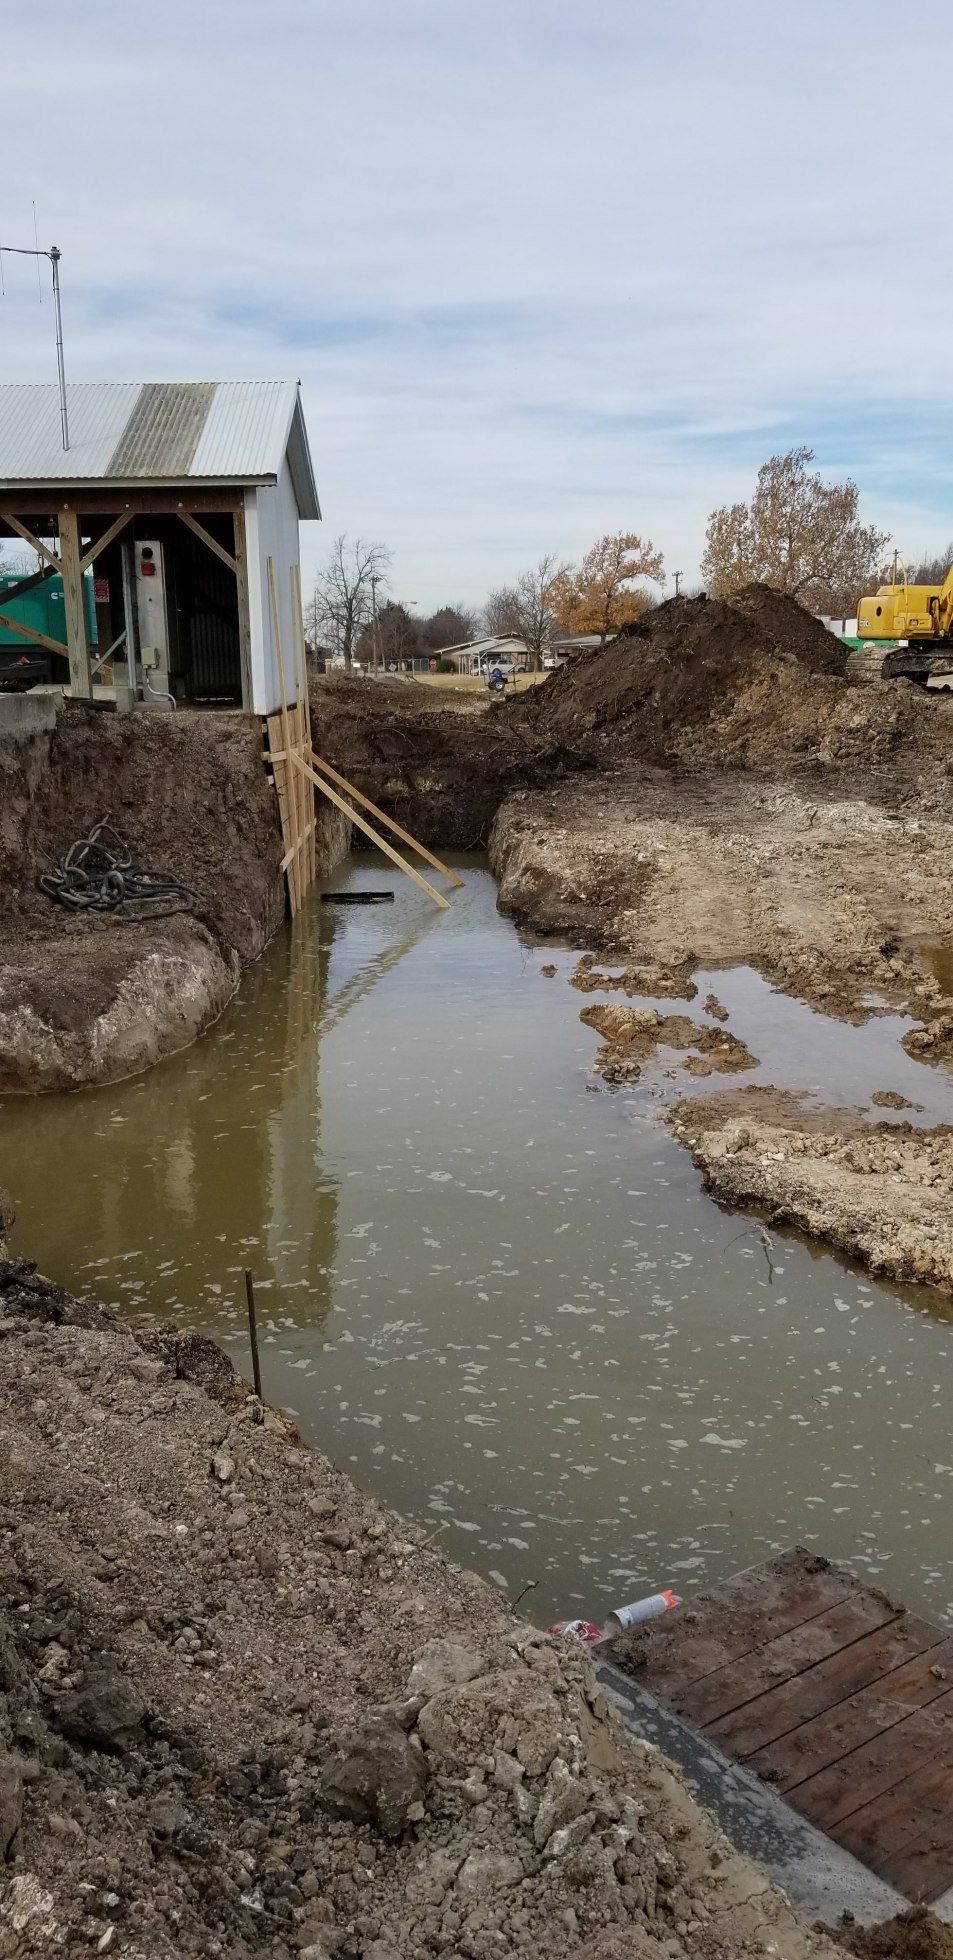 Gravel — Pool Of Water Being Drained in Wichita, KS